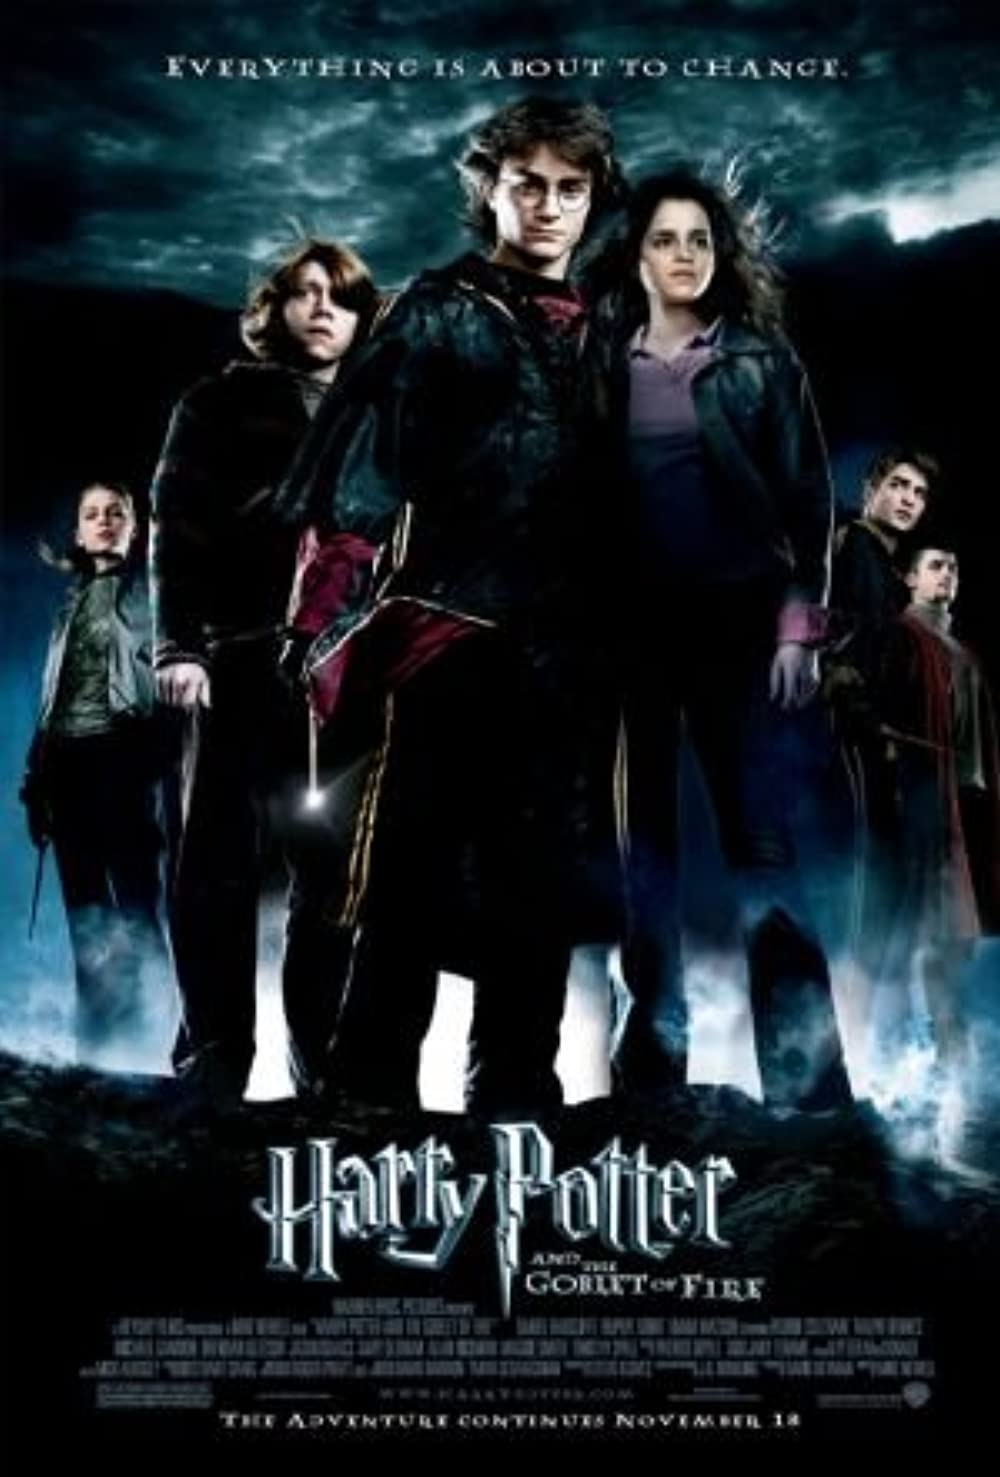 HARRY POTTER AND THE GOBLET OF FIRE (RE-RELEASE)